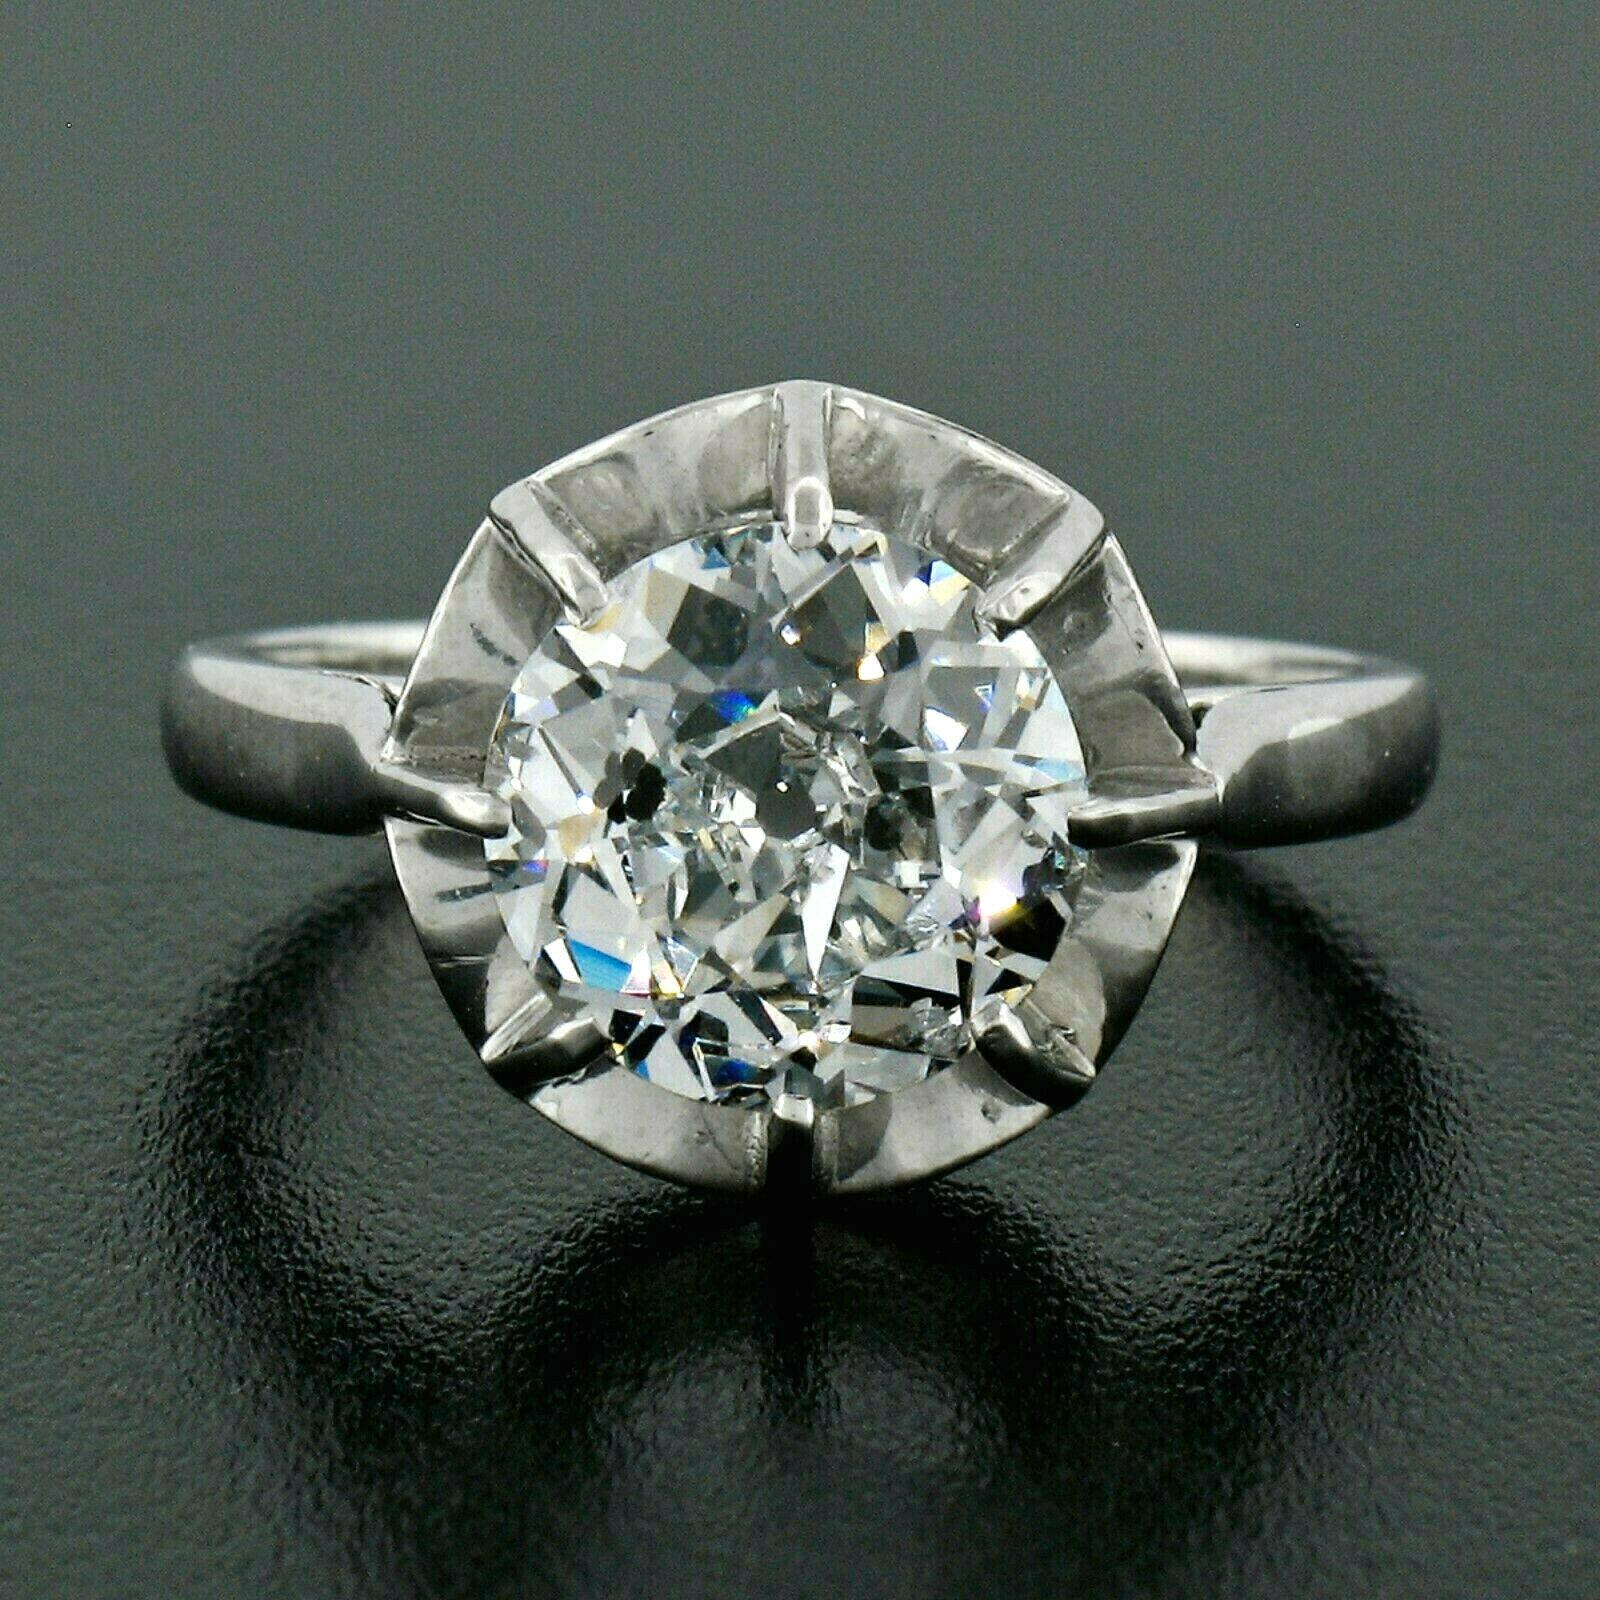 This gorgeous antique diamond engagement ring was hand crafted in solid .900 platinum during the art deco period and features a very simple and elegant design set with a stunning, old European cut diamond prong set at its center. The center stone